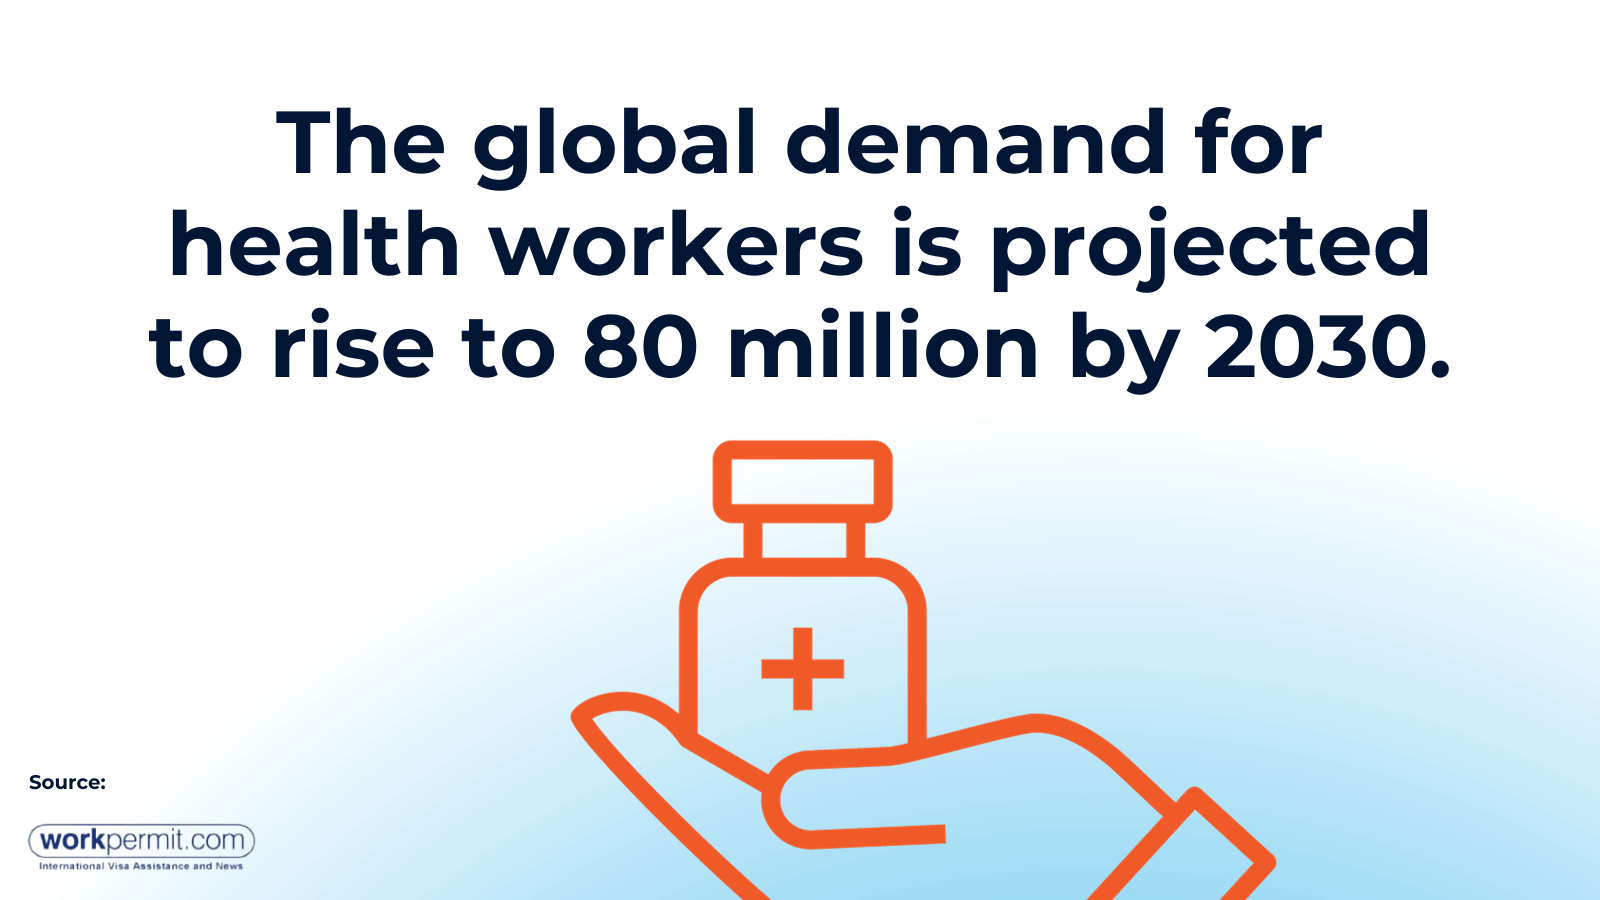 Stat - The global demand for health workers is projected to rise to 80 million by 2030